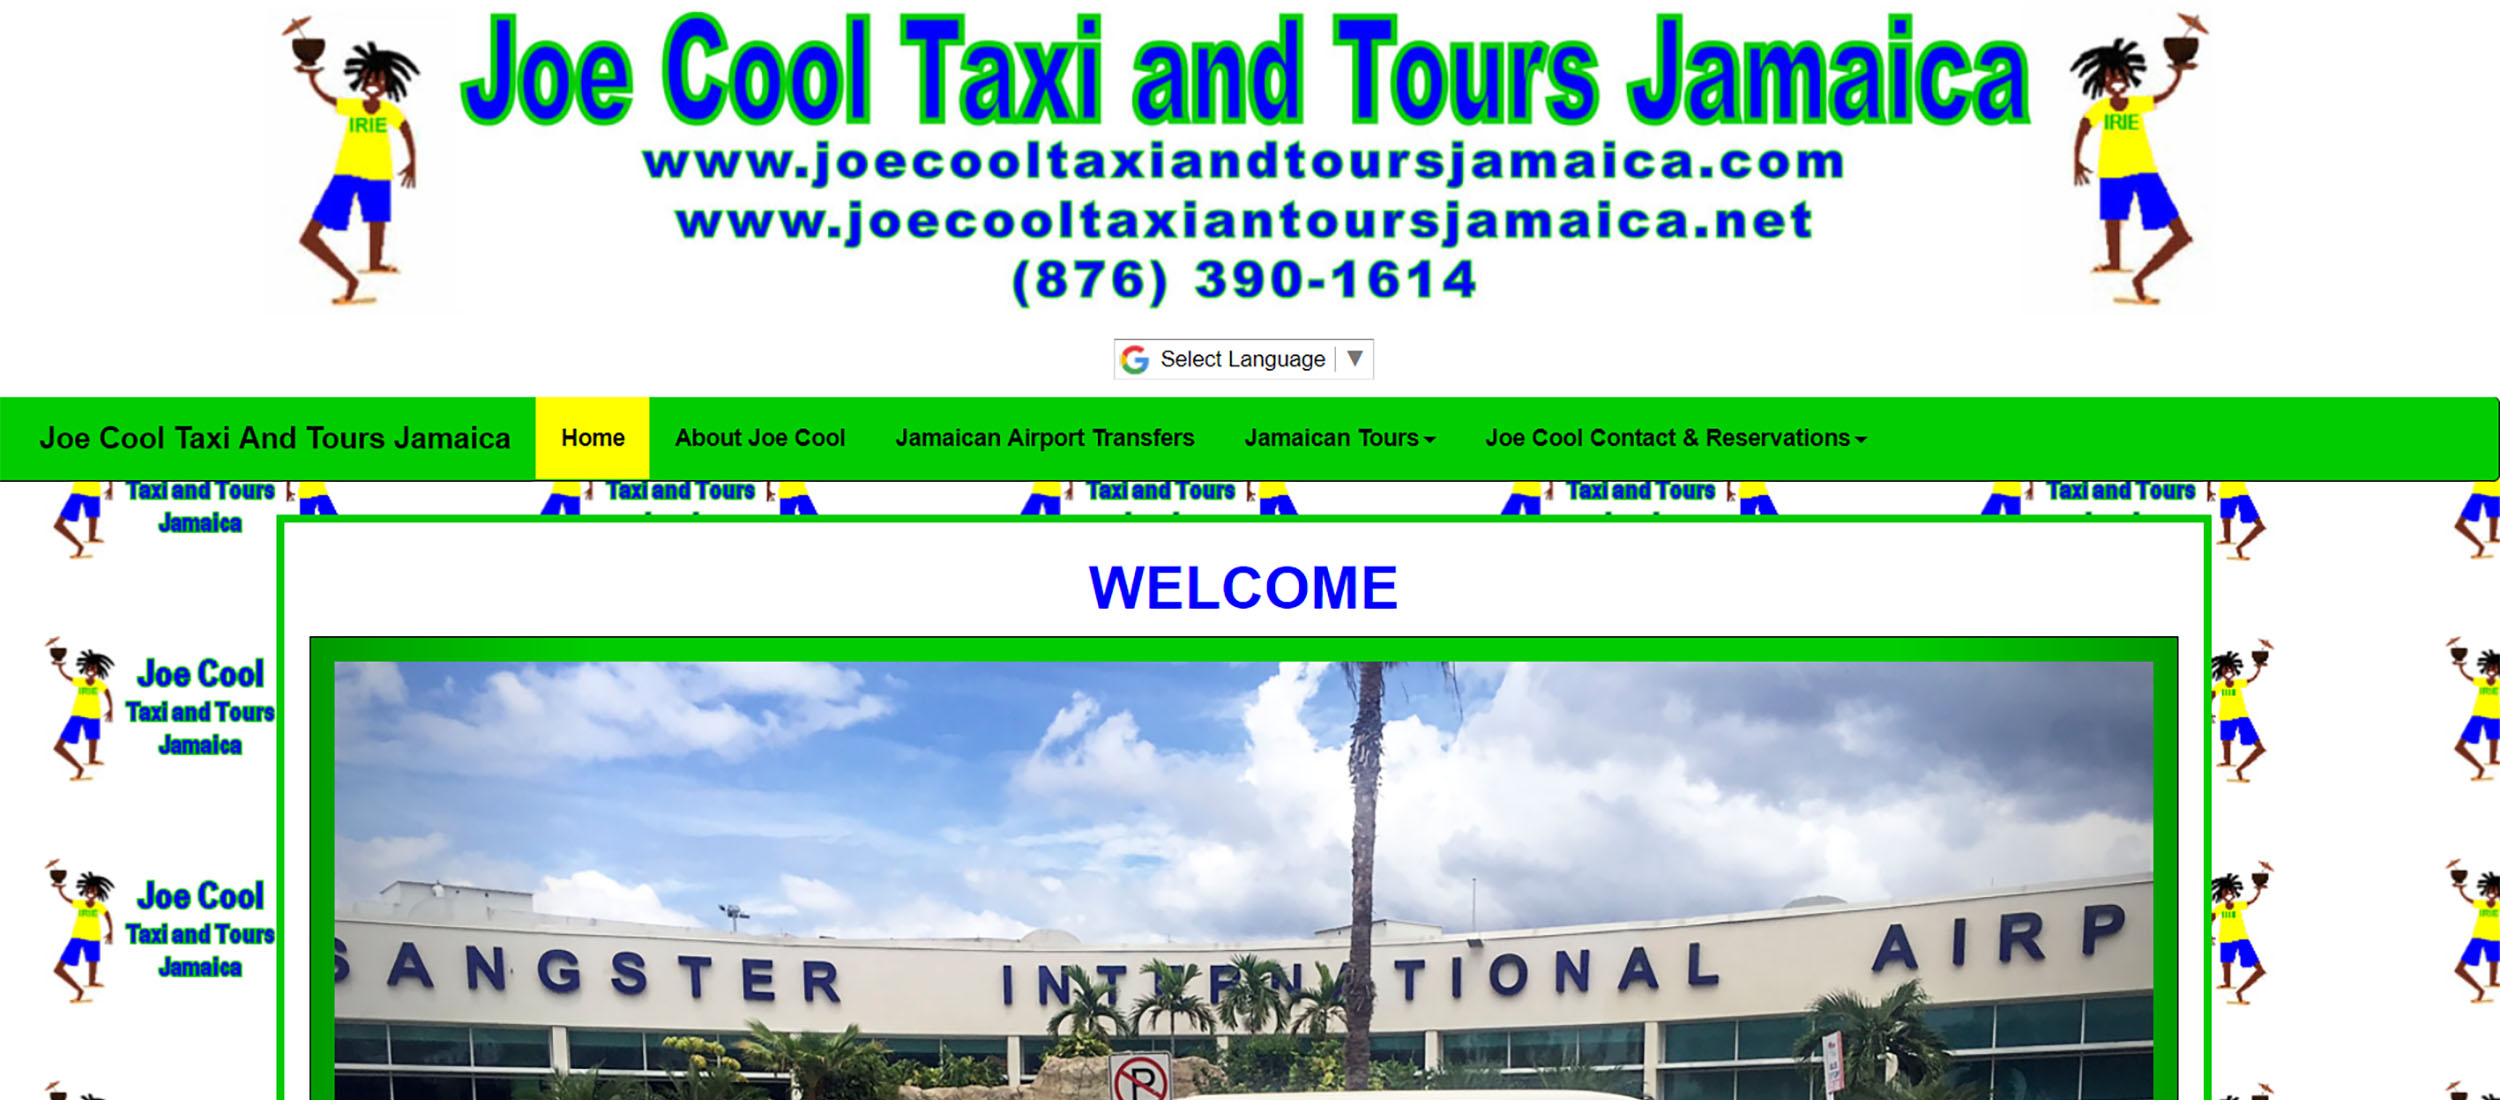 Joe Cool Taxi and Tours Jamaica by Barry J. Hough Sr.